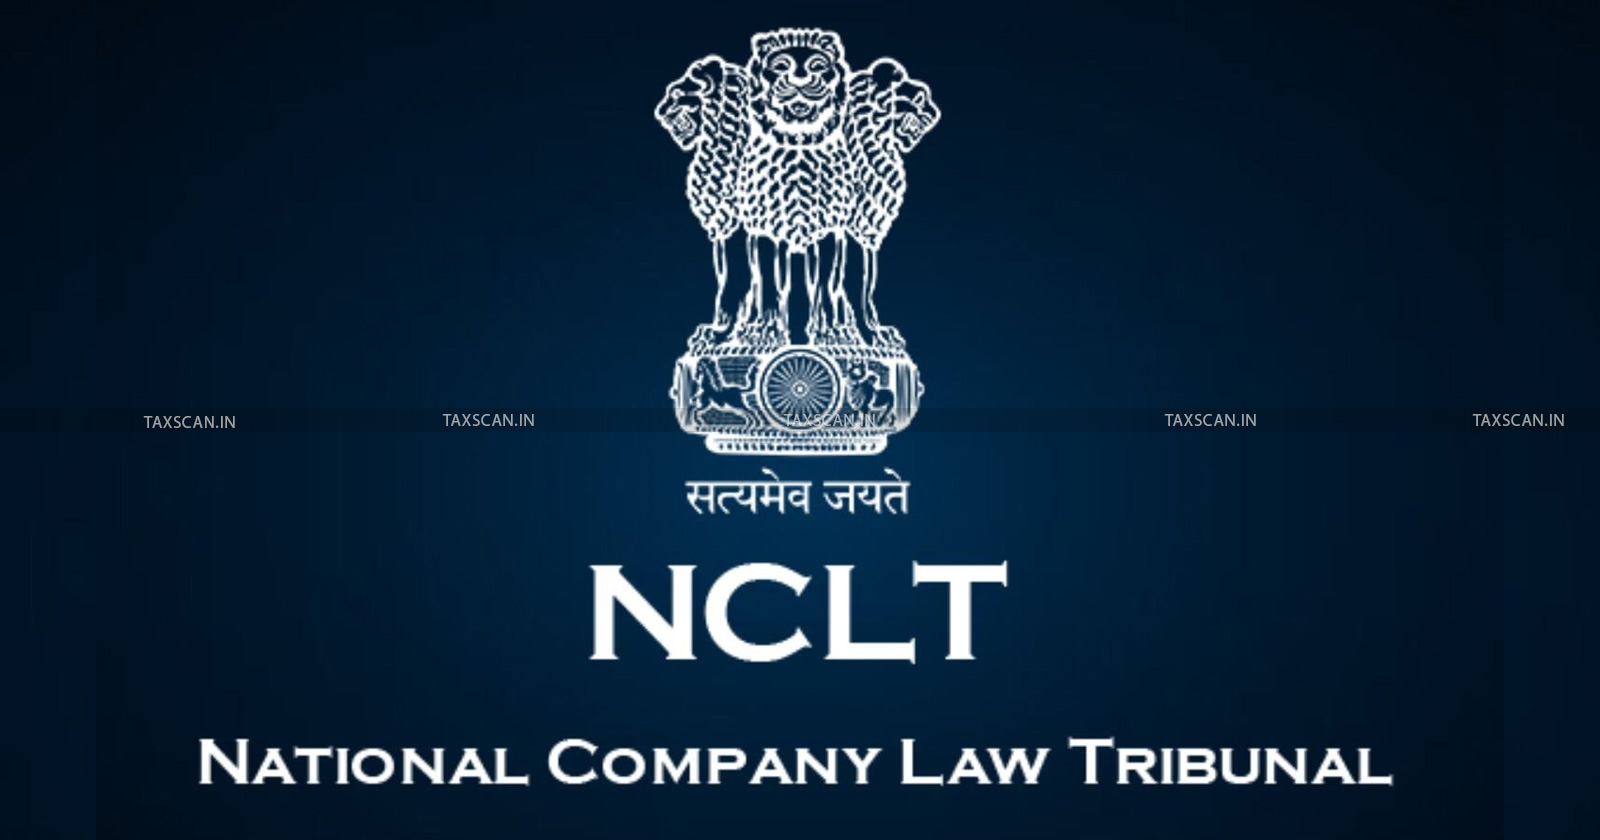 CIRP - Financial Creditor - Resolution applicant - Payment on Resolution Plan - NCLT - taxscan